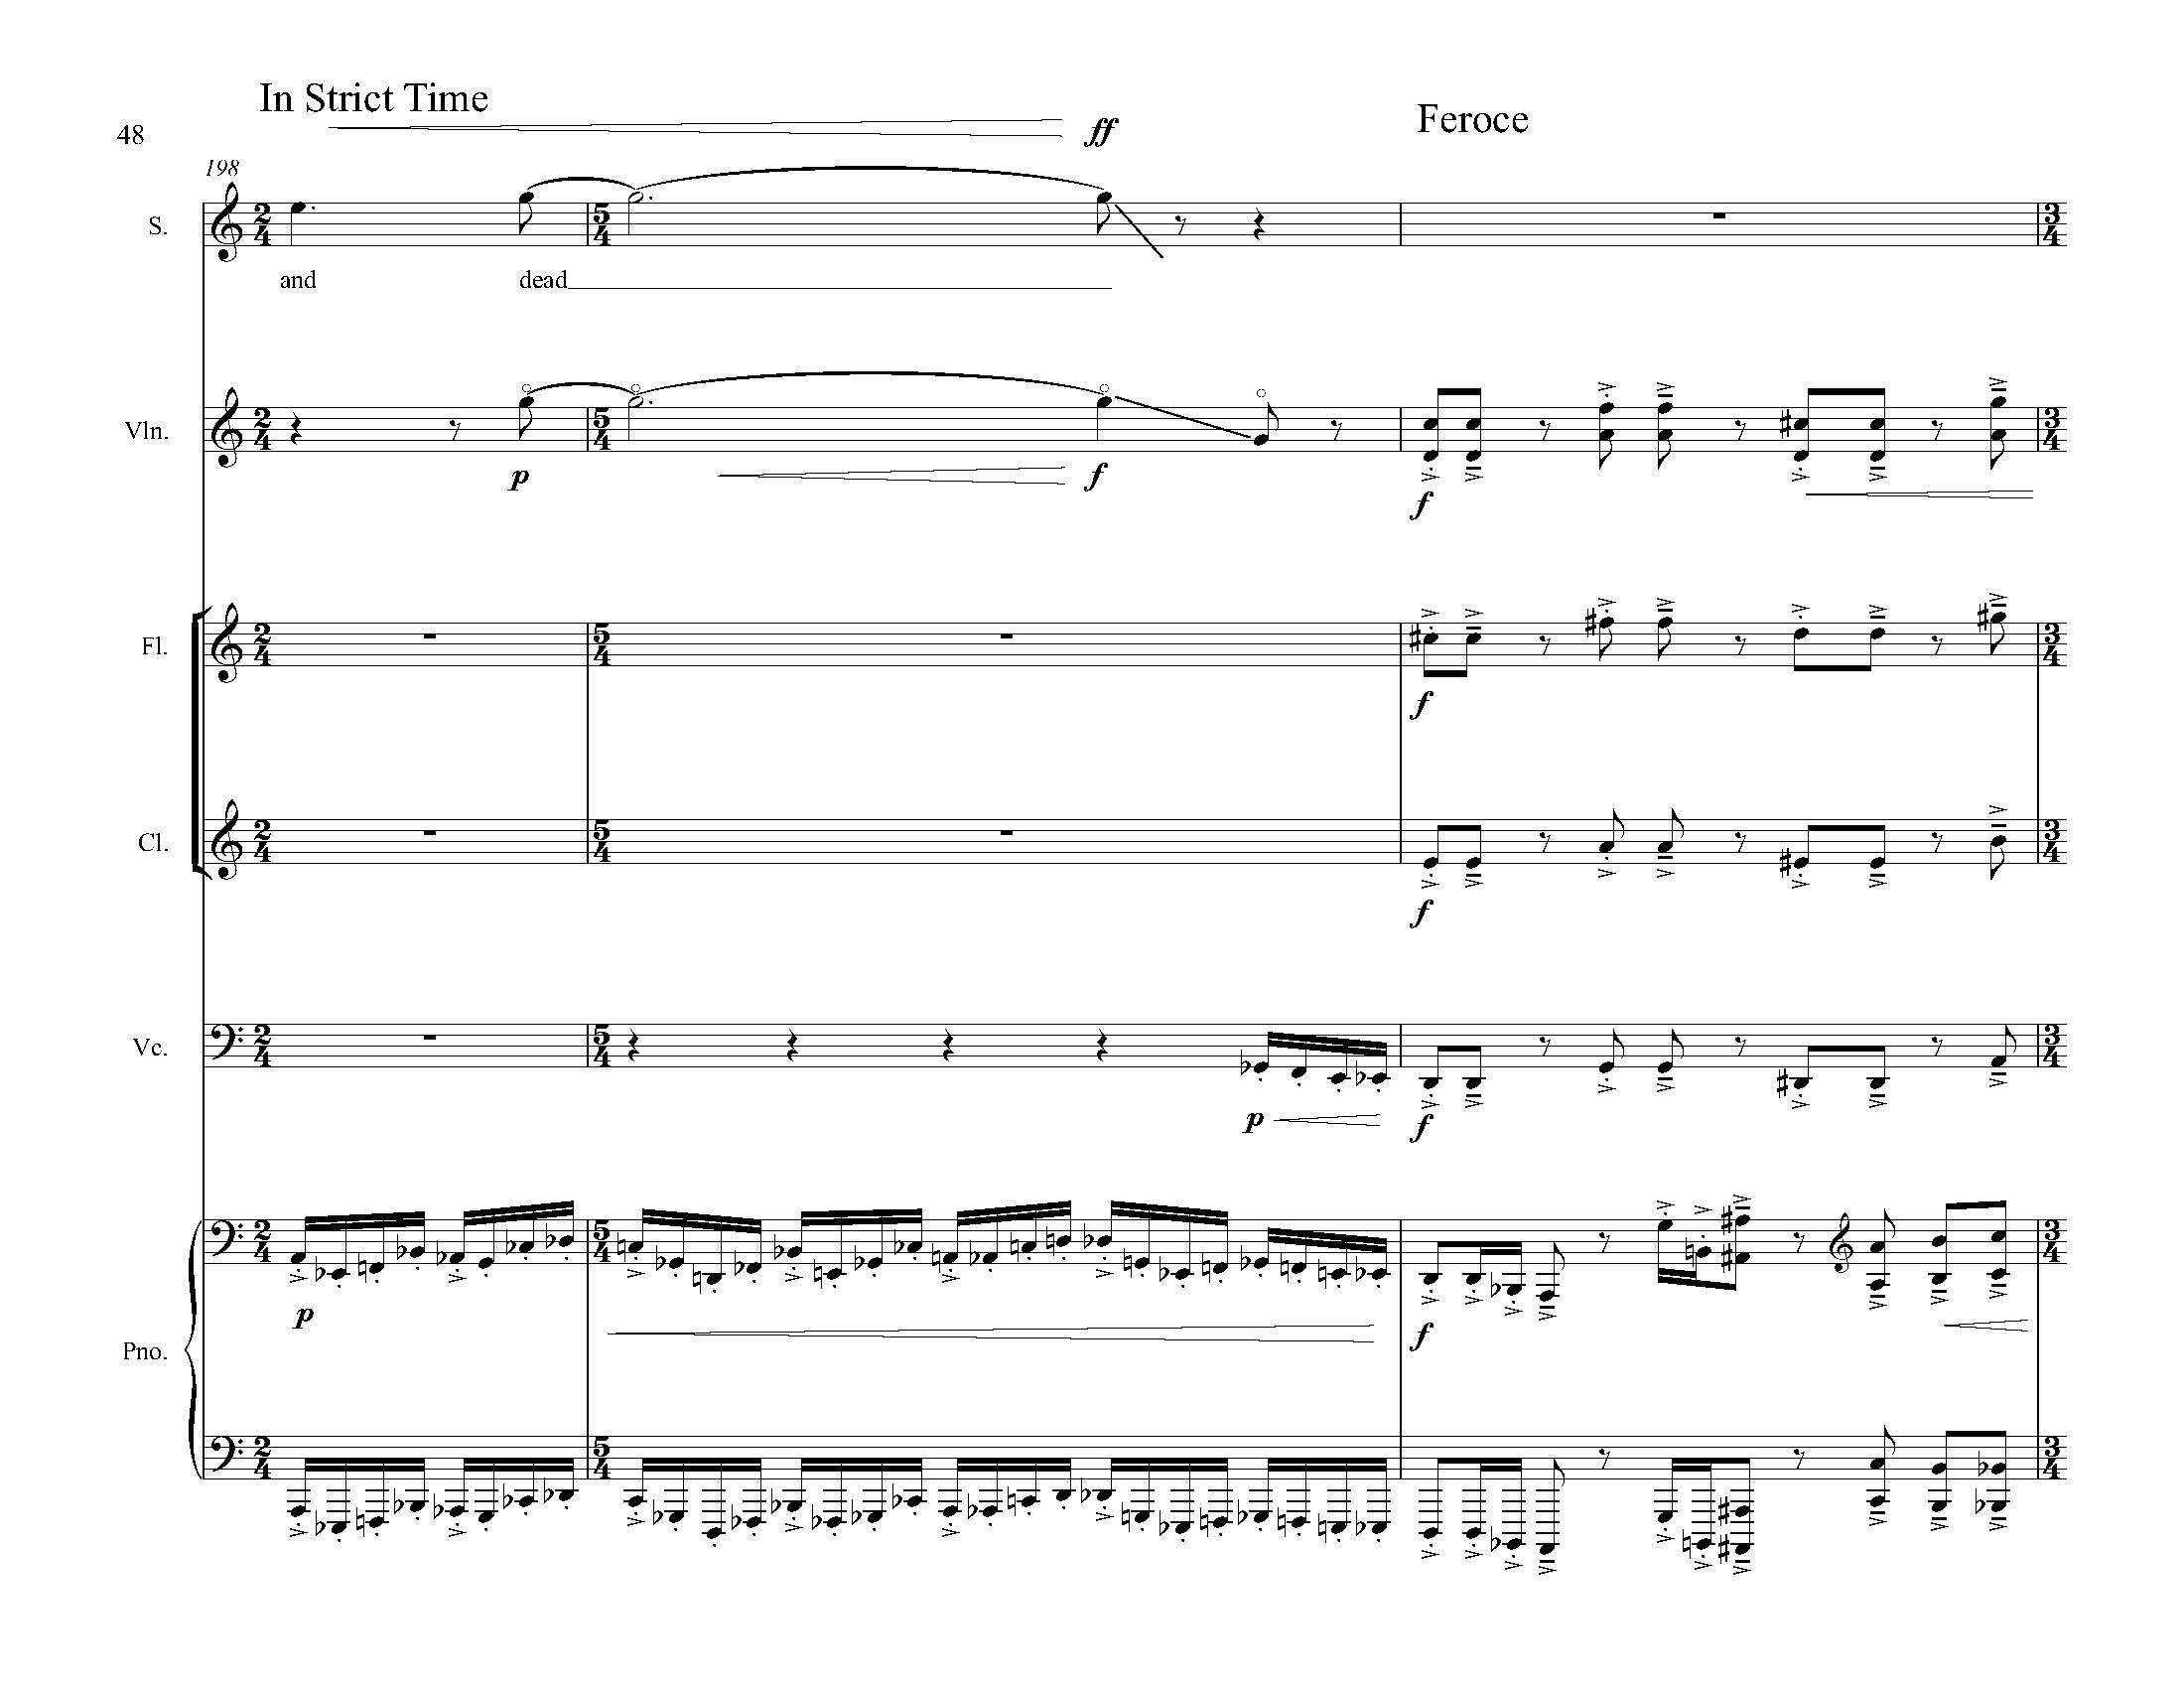 The Hill Wife - Complete Score_Page_056.jpg